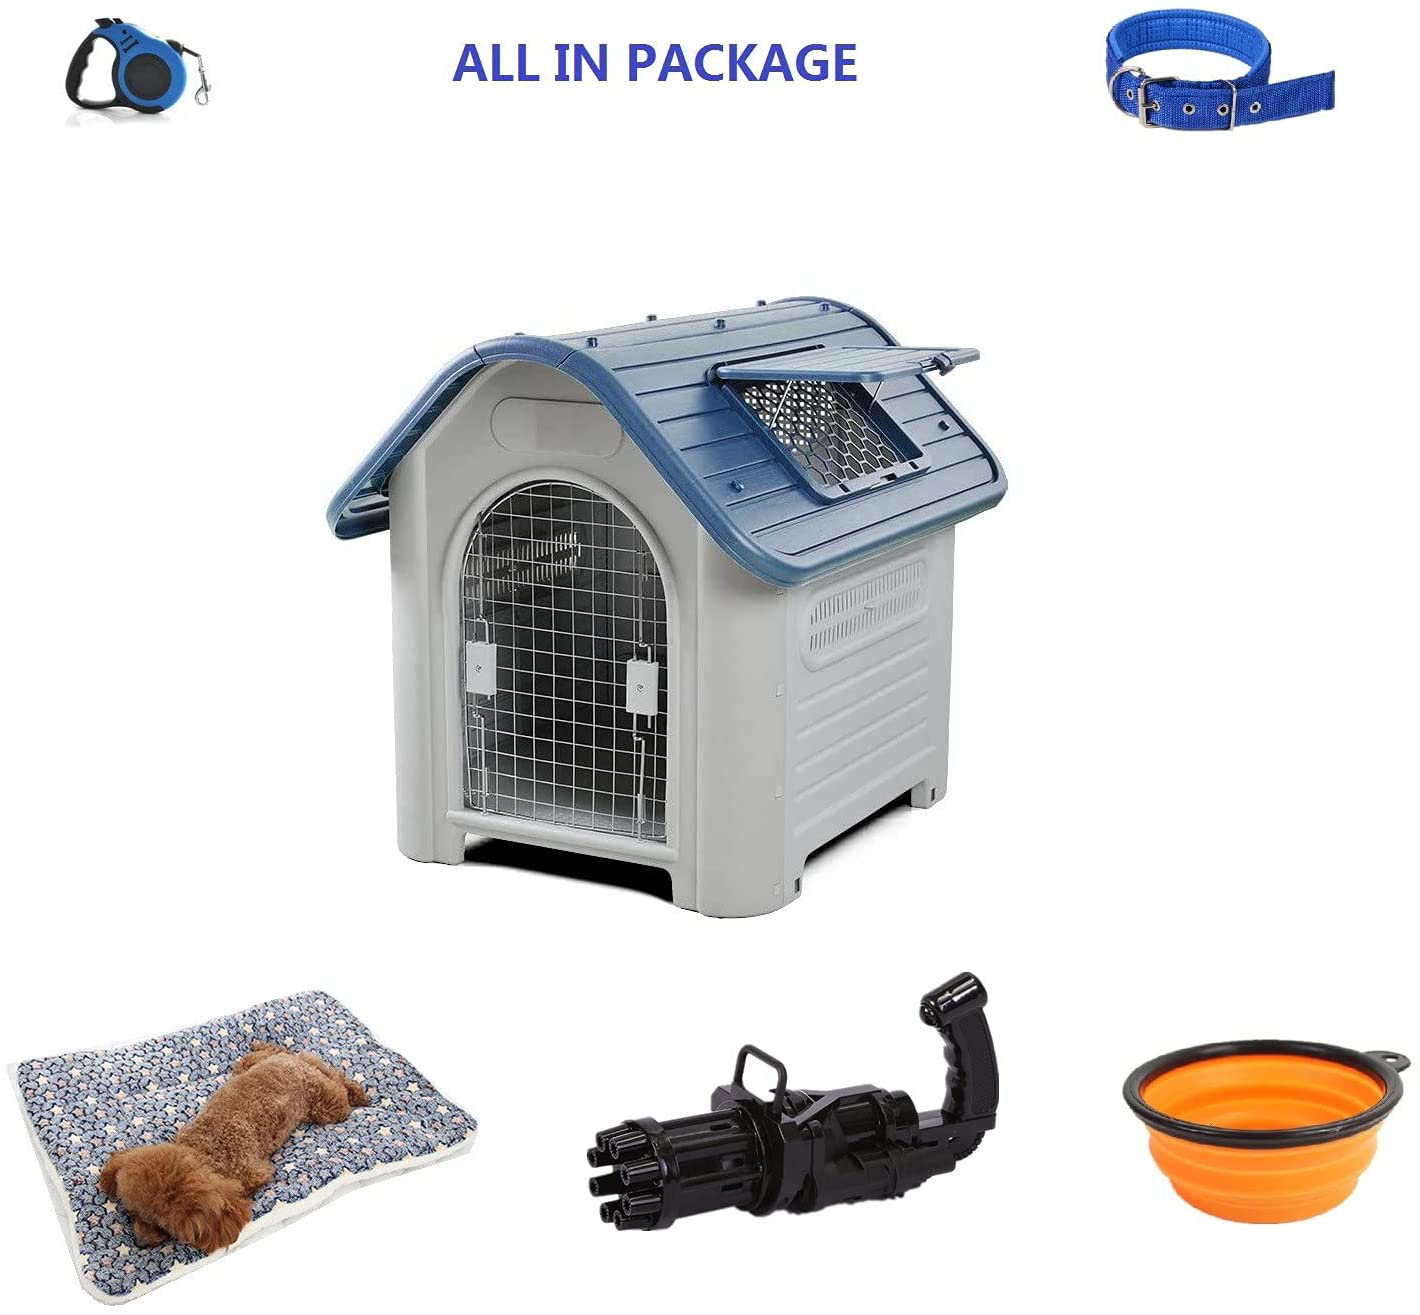 NC Pet Dog Large House Durable Waterproof Plastic Indoor Outdoor Puppy Shelter Kennel Detachable Design with Air Vents and Elevated Floor (Large, Blue)